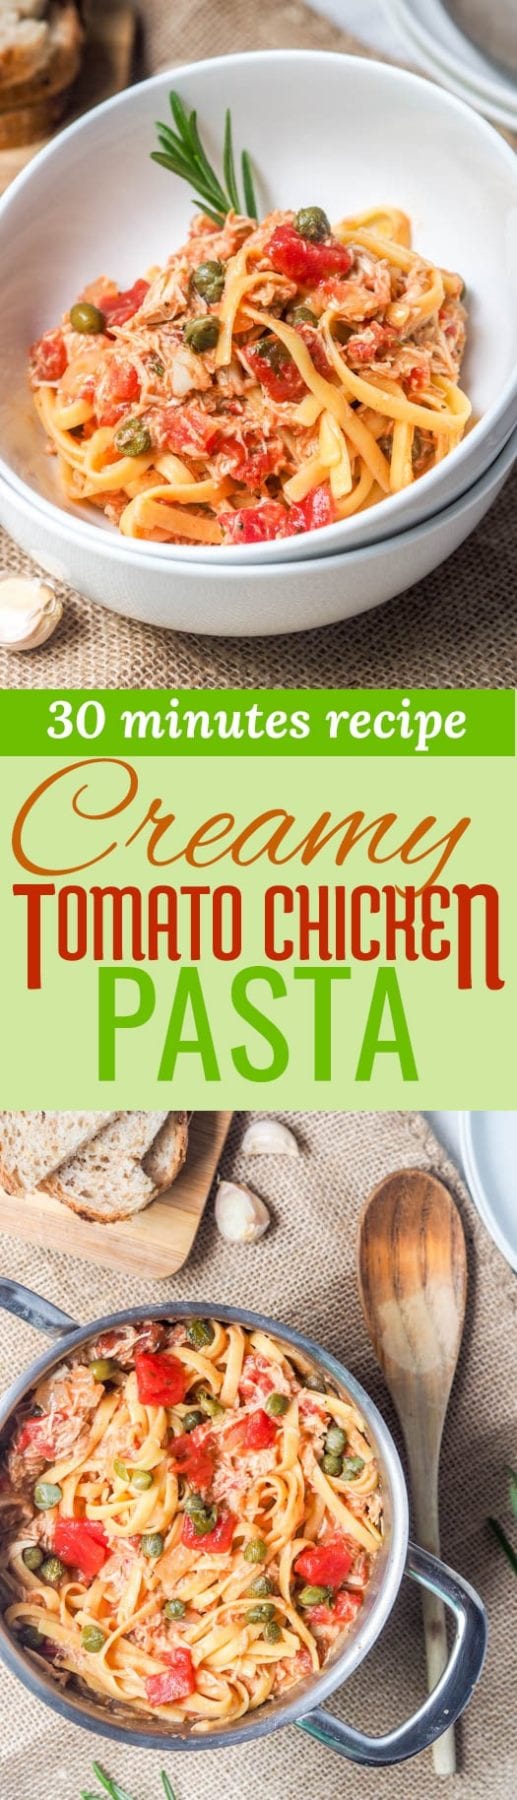 Creamy tomato chicken pasta - this 30 minute recipe makes for a perfect low fuss weeknight meal. Made with shredded rotisserie chicken, capers and a creamy tomato sauce. Gluten-free and dairy-free too. 